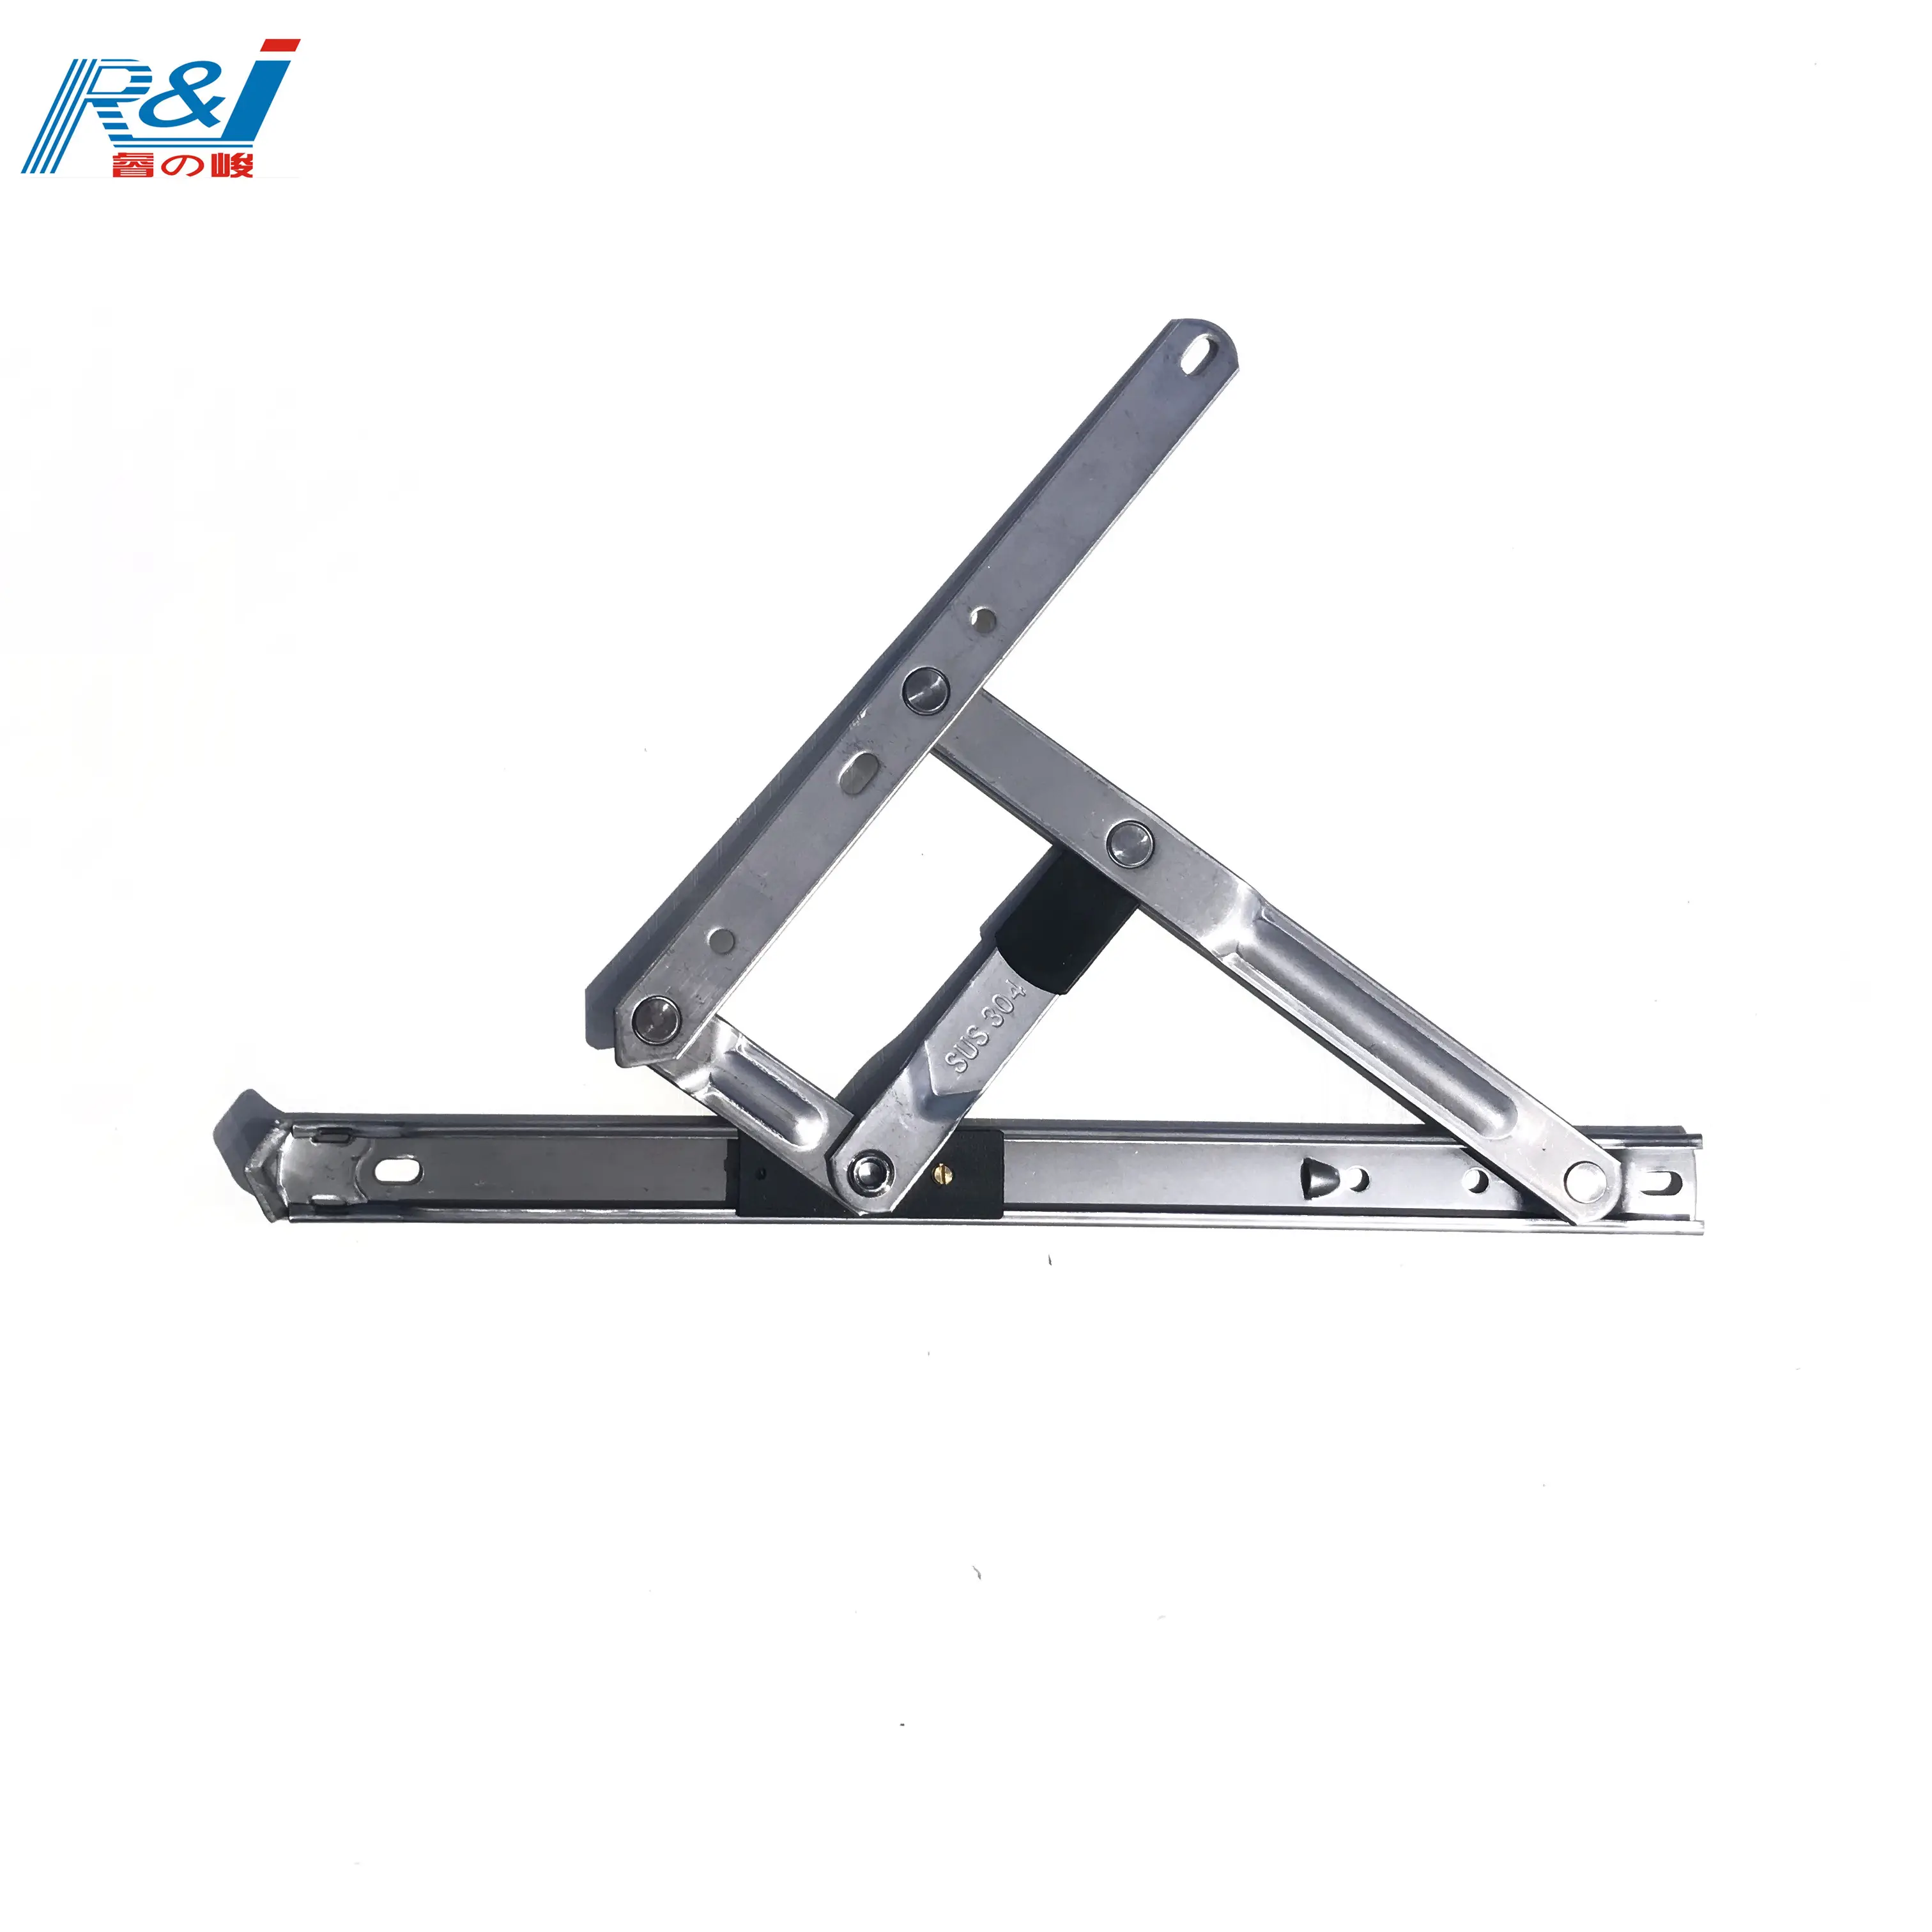 Pasar Vietnam Hot Sale 22 Mm Square Alur Stainless Steel Heavy Duty Side-Hung Friction Stay untuk Jendela